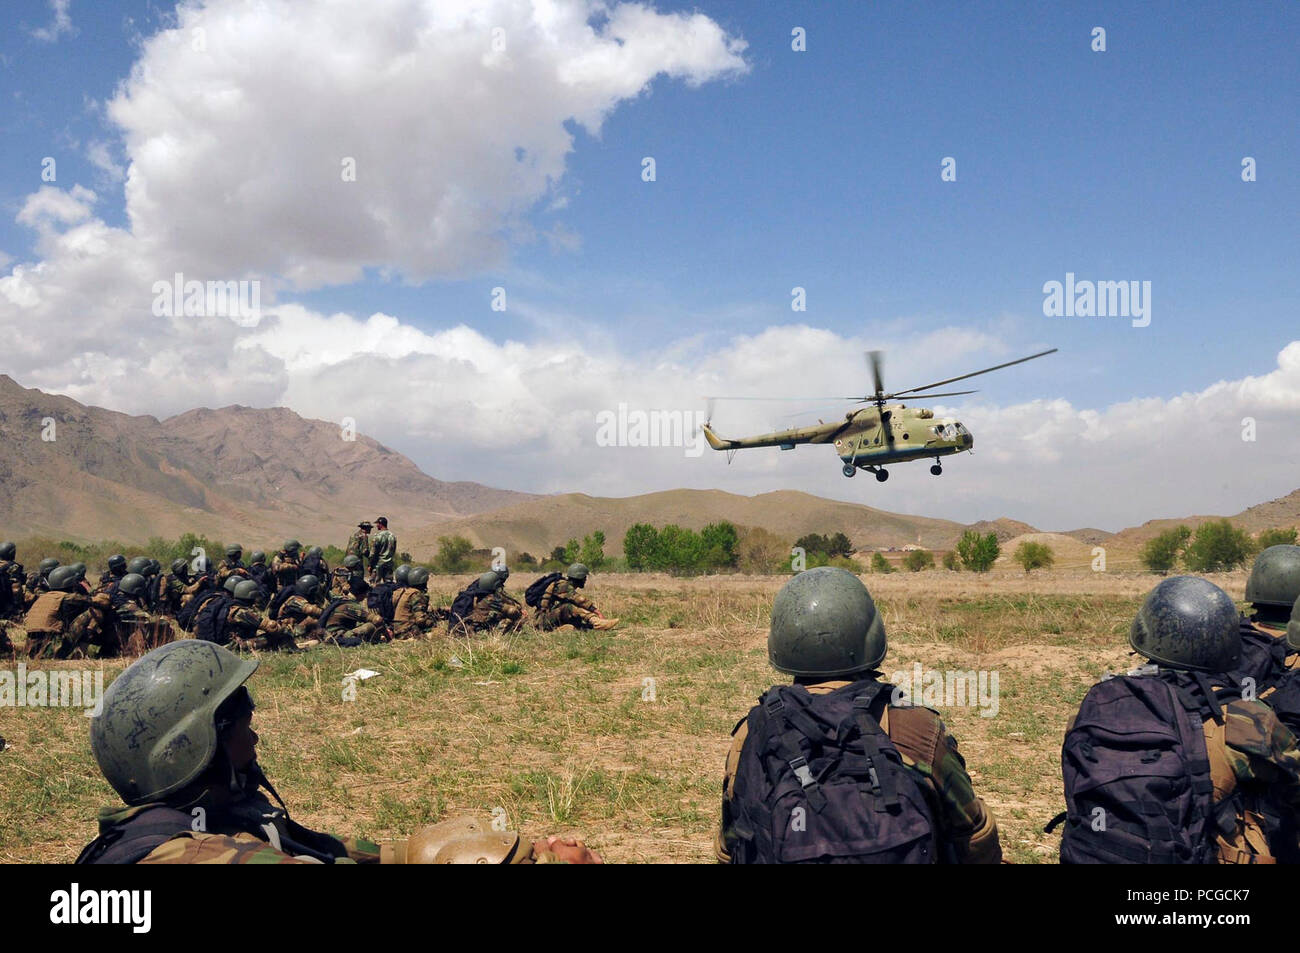 KABUL, Afghanistan - Afghan commandos from the Sixth Commando Kandak wait for a Mi-17 helicopter to land as they practice infiltration techniques using the Afghan National Army Air Corps Mi-17Õs on April 1, 2010 at Camp Morehead in the outer regions of Kabul. The training was in preparation for future air assault missions needed in order to disrupt insurgent activity and bring stability to the population and the region. (US Navy Stock Photo